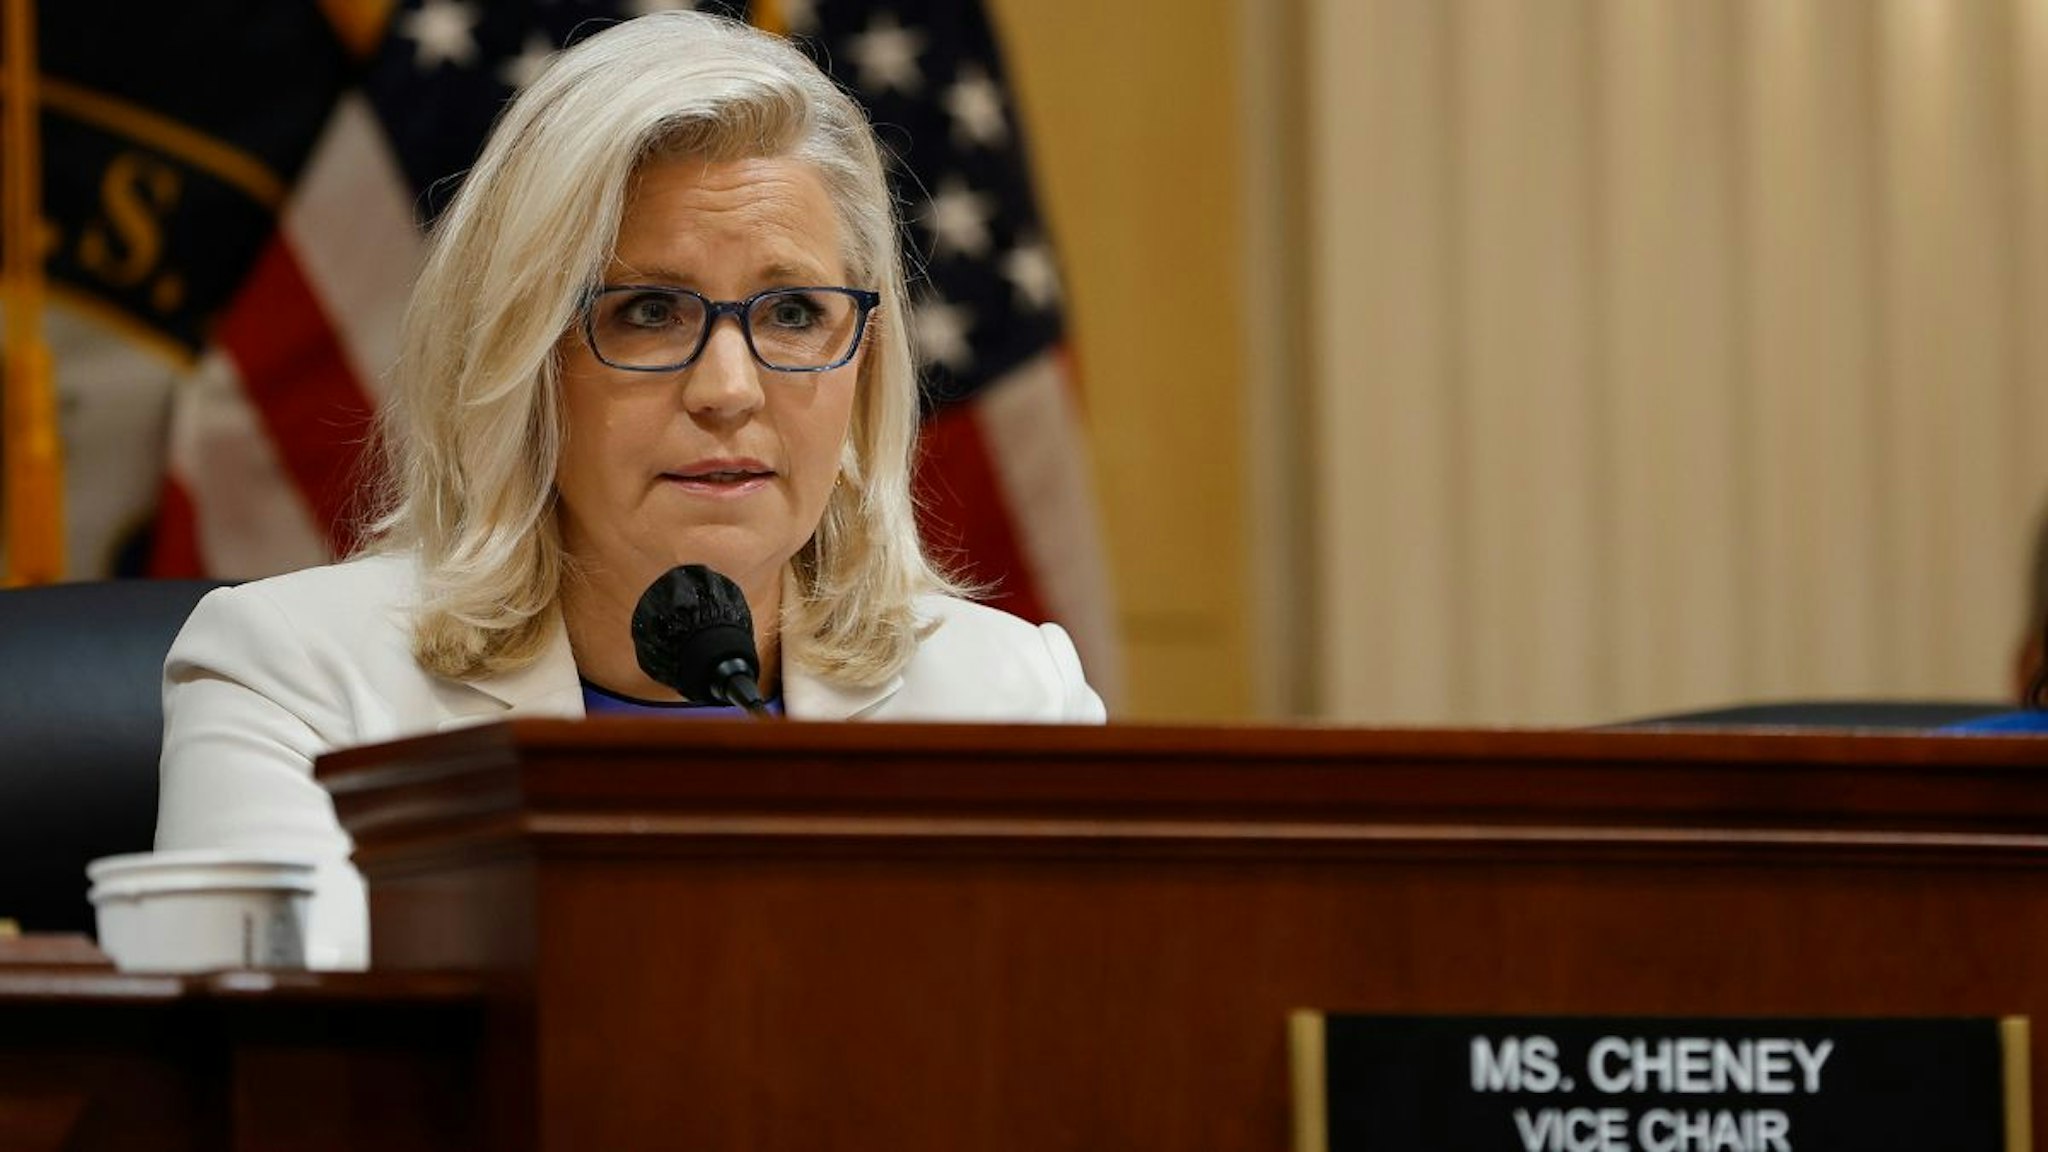 Rep. Liz Cheney (R-WY), Vice Chairwoman of the House Select Committee to Investigate the January 6th Attack on the U.S. Capitol, delivers closing remarks during a prime-time hearing in the Cannon House Office Building on July 21, 2022 in Washington, DC.